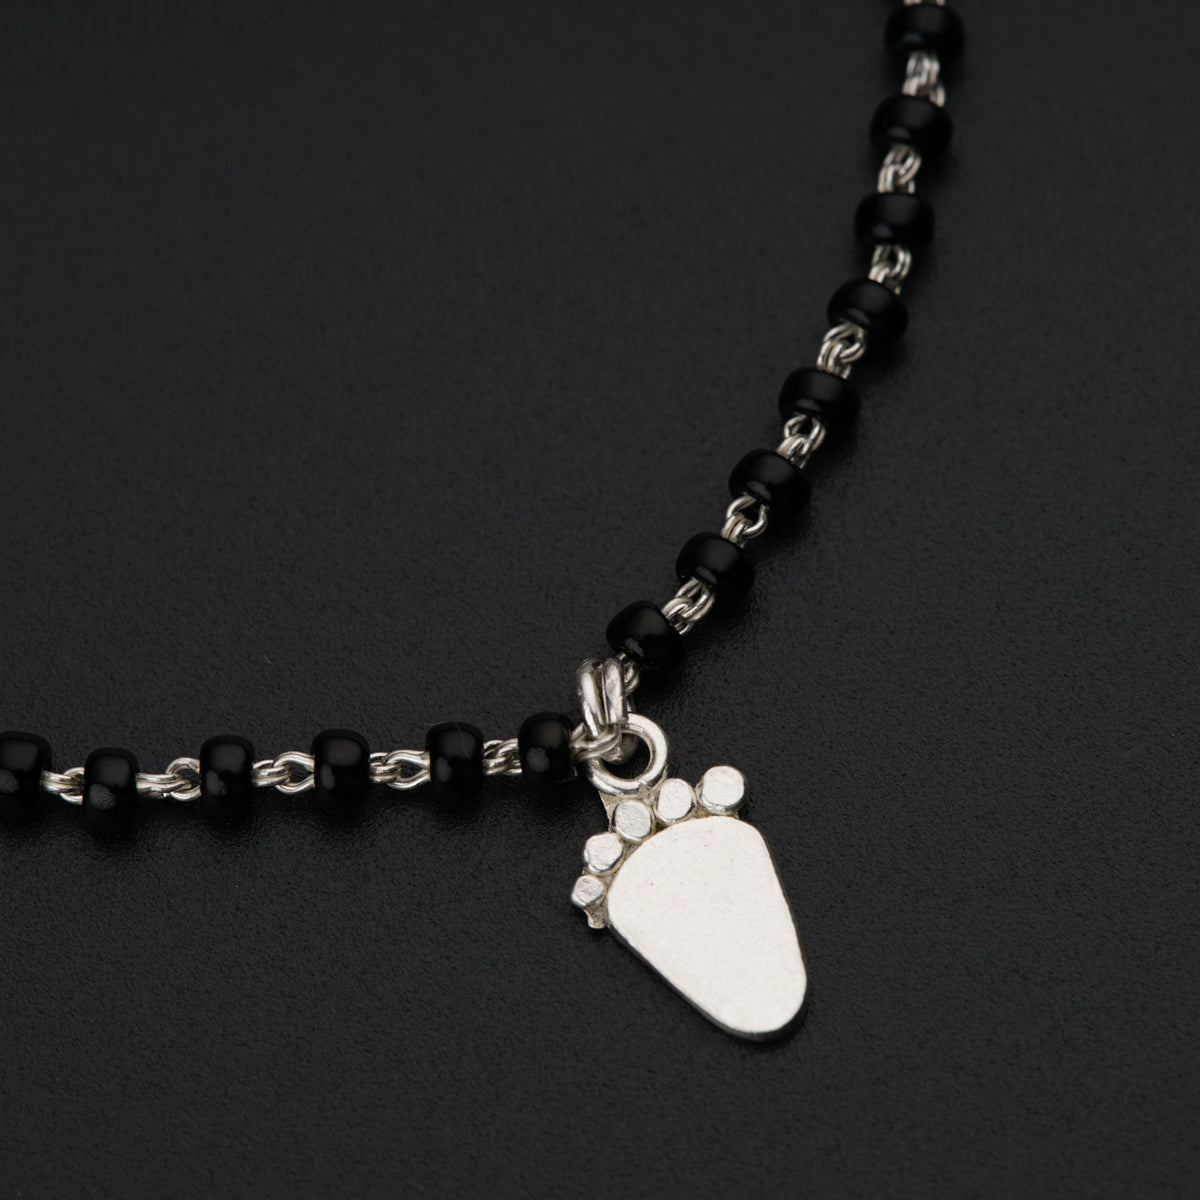 a black beaded necklace with a dog paw charm